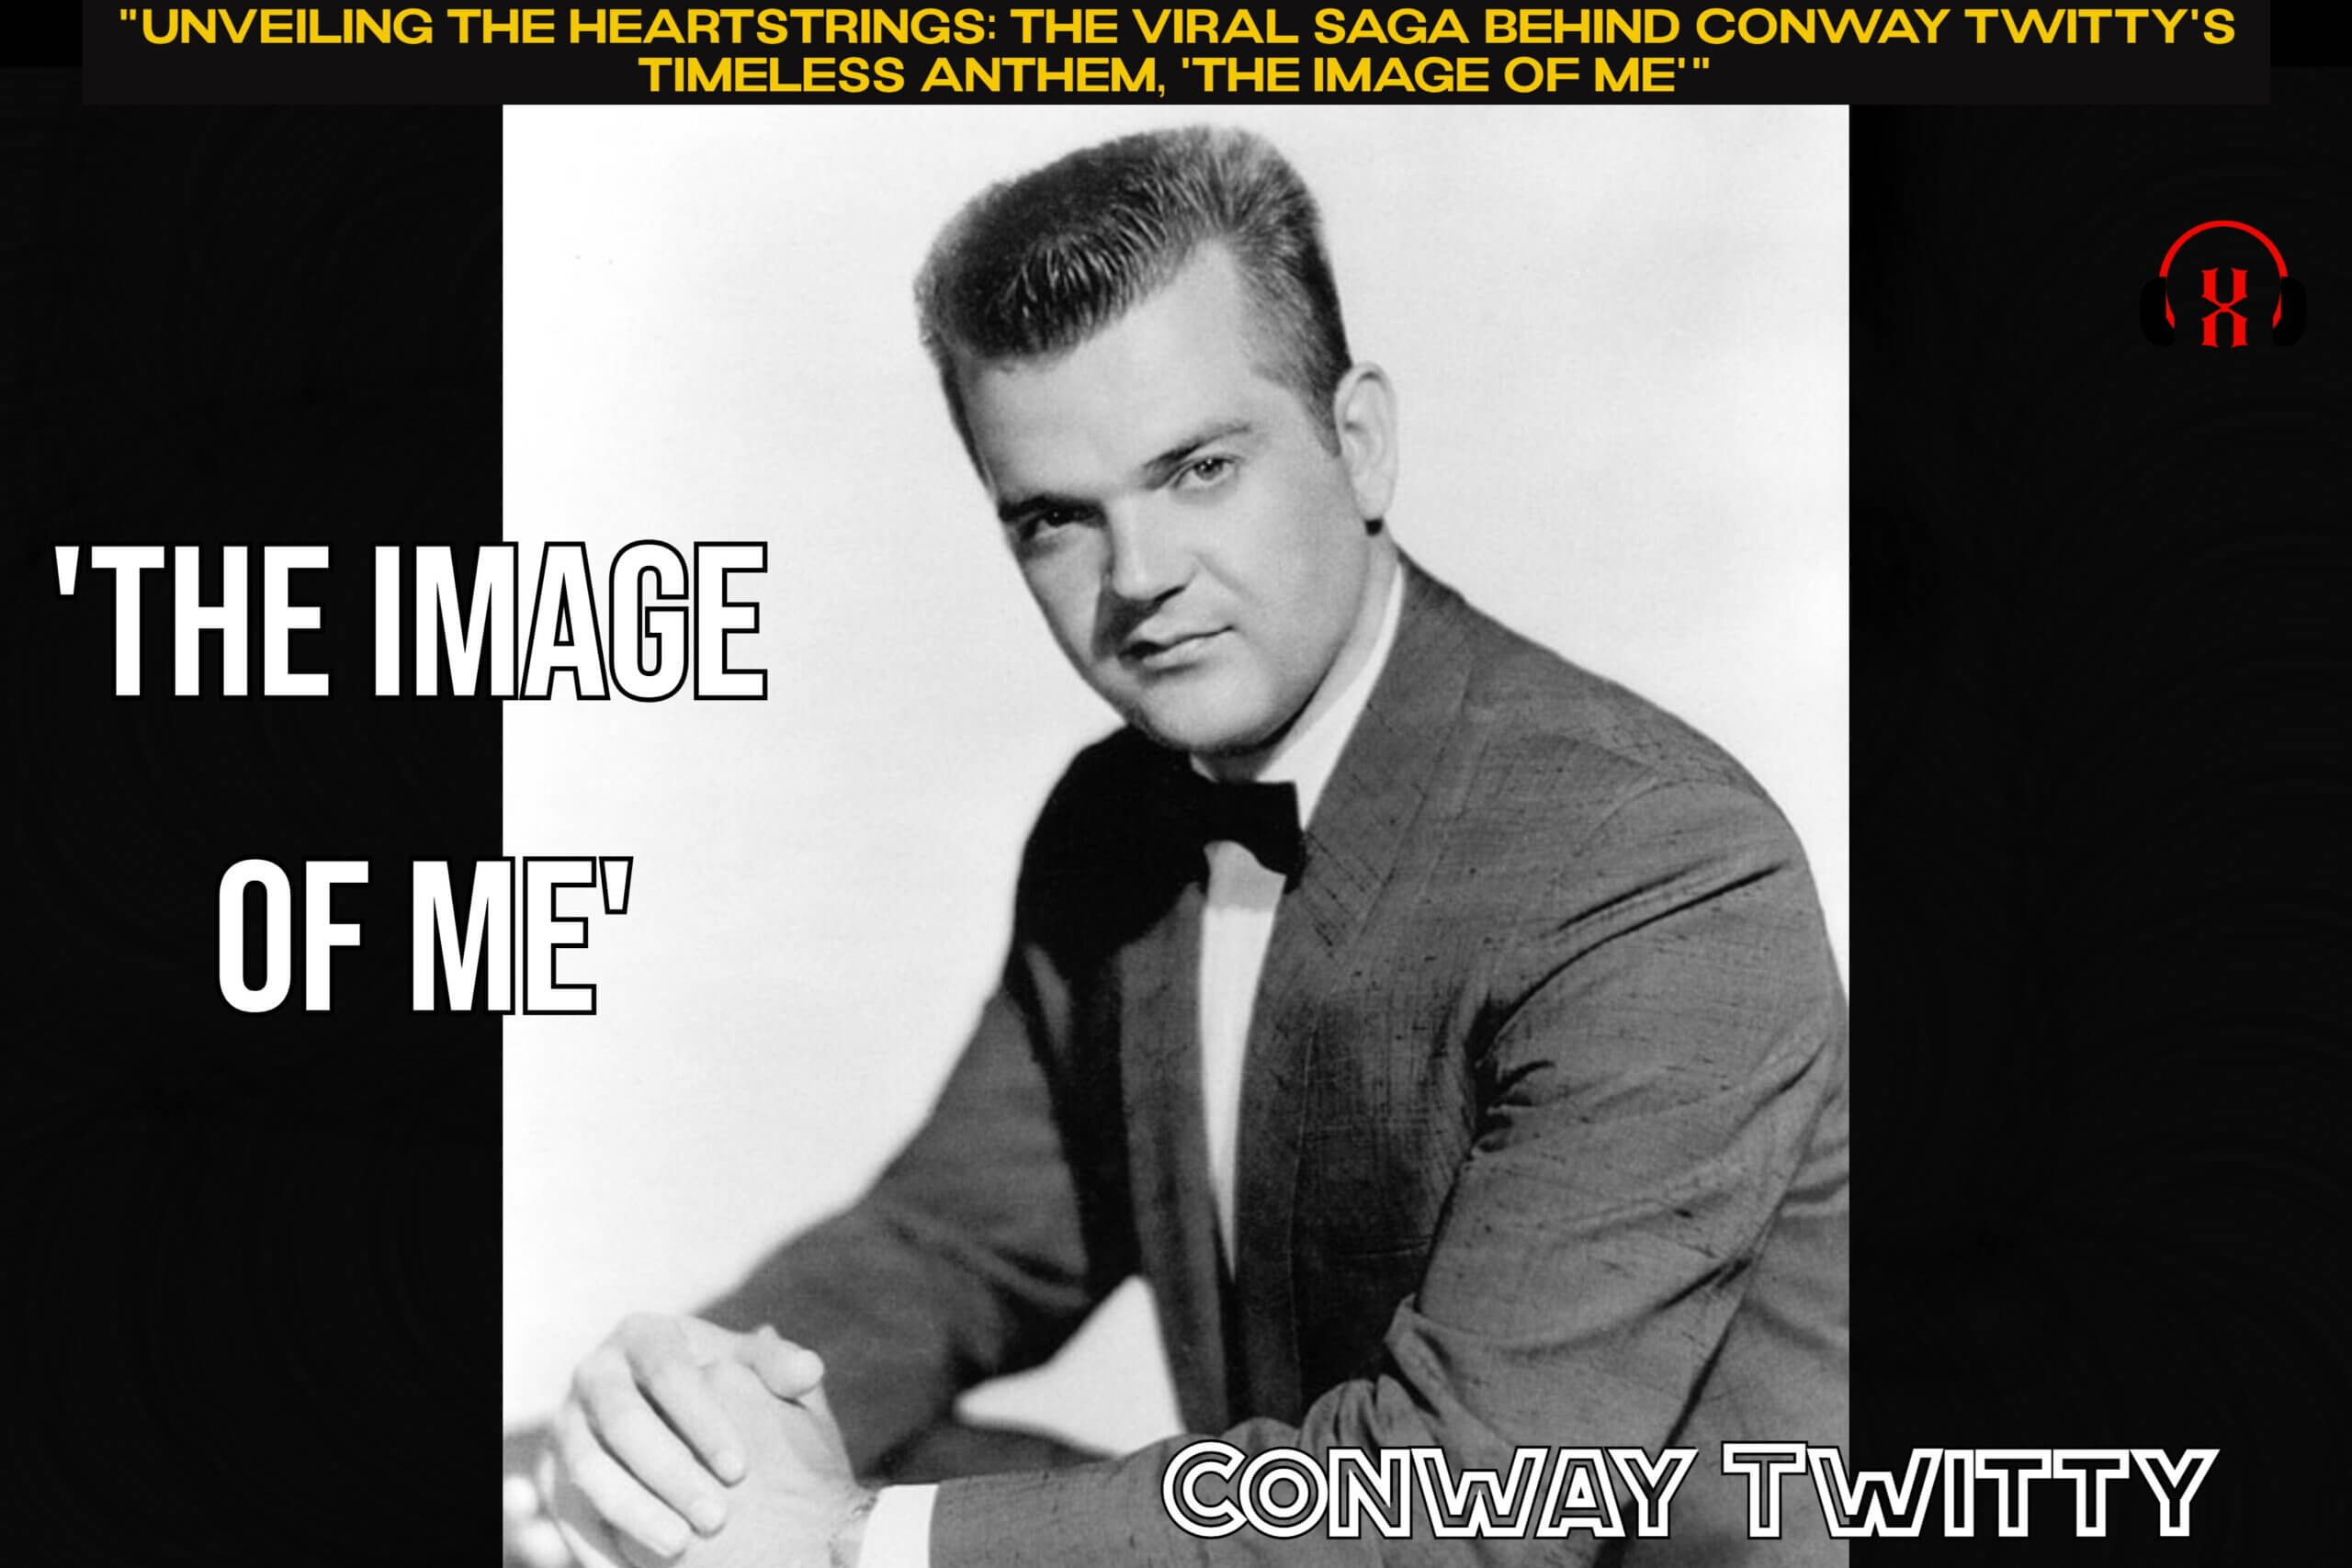 "Unveiling the Heartstrings: The Viral Saga Behind Conway Twitty's Timeless Anthem, 'The Image of Me'"